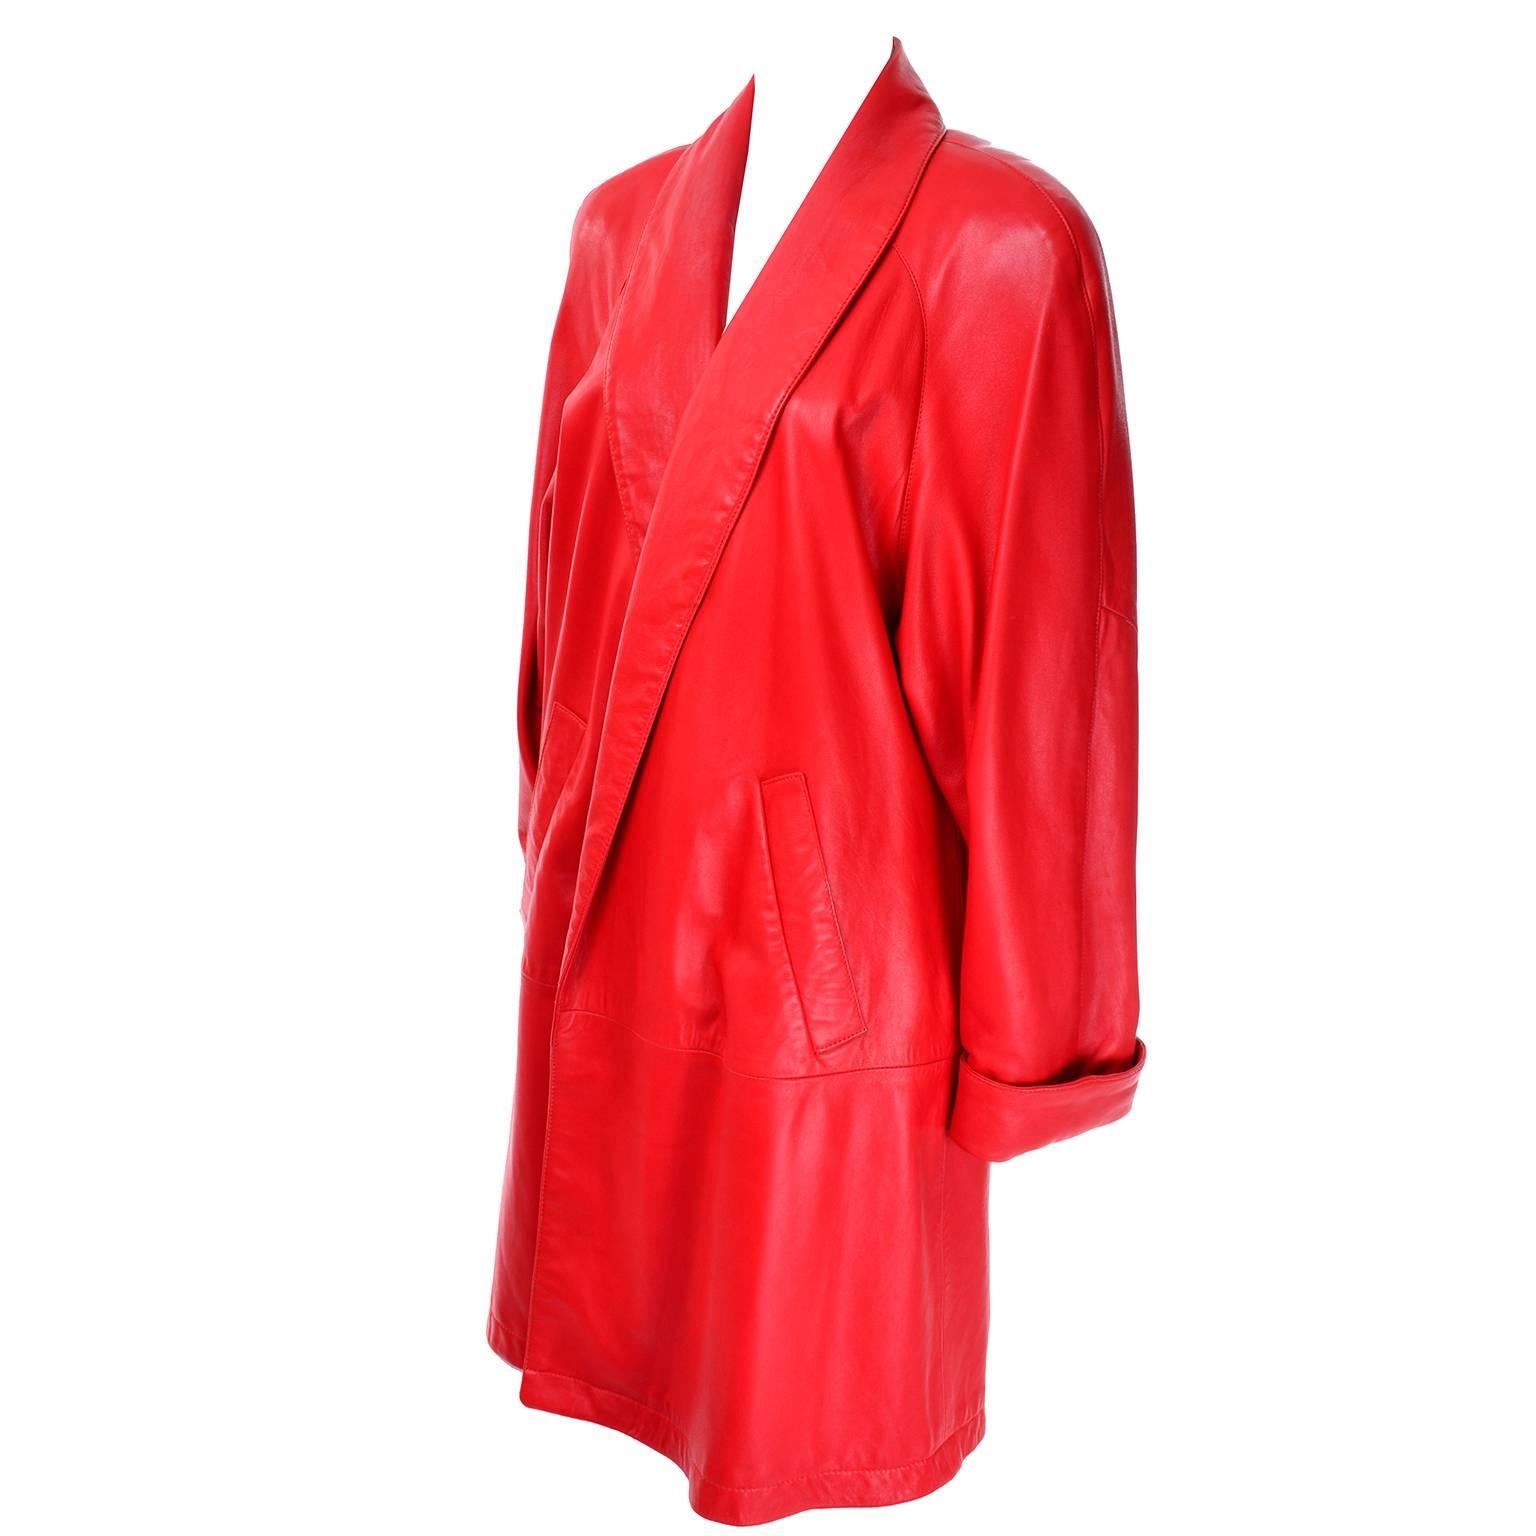 This is a 1980's Vakko long leather coat in a fiery red-orange! This extremely soft leather jacket is open in the front, with dramatic shoulder pads and hip pockets. The sleeves can be worn long or cuffed, and the jacket is fully lined. Excellent